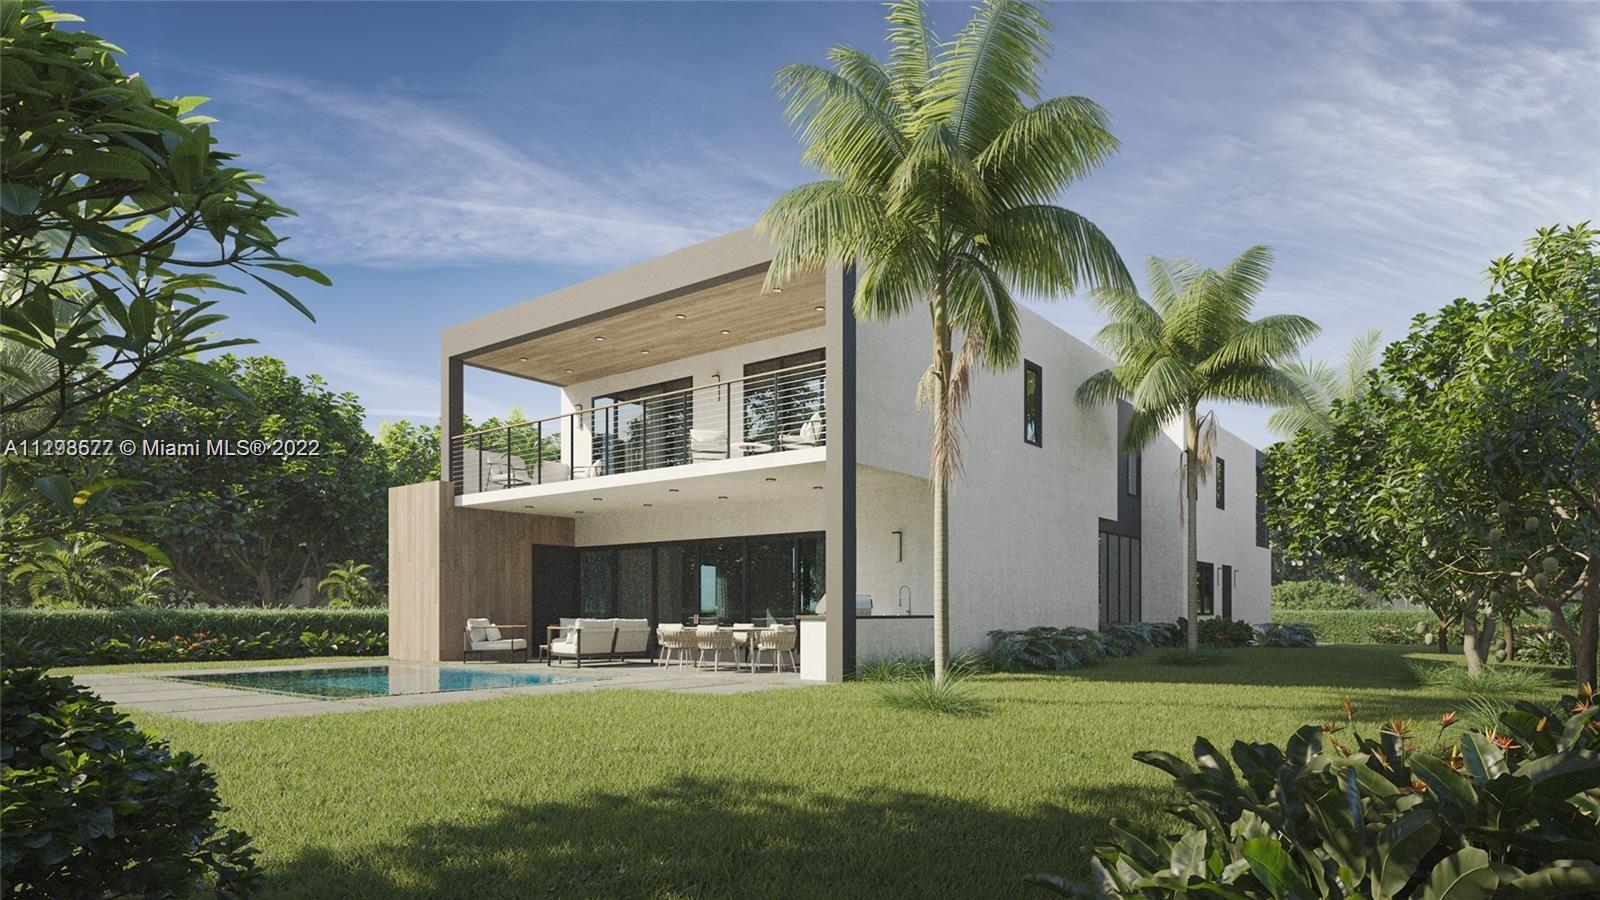 Great opportunity to renovate this 3 bedroom, 2 bathroom corner home in the highly sought after South Miami or build your dream home. The sale is offered with plans to build a contemporary Two- story home with approx 5,234 Sq-Ft, 5 bedrooms /5 1/2 baths, pool, 2 car garage, and fruit trees. Close to great A+ schools, fabulous restaurants, shops, and parks, enjoy the free Freebee pick-up and drop-offs, and much more. Make it your own!